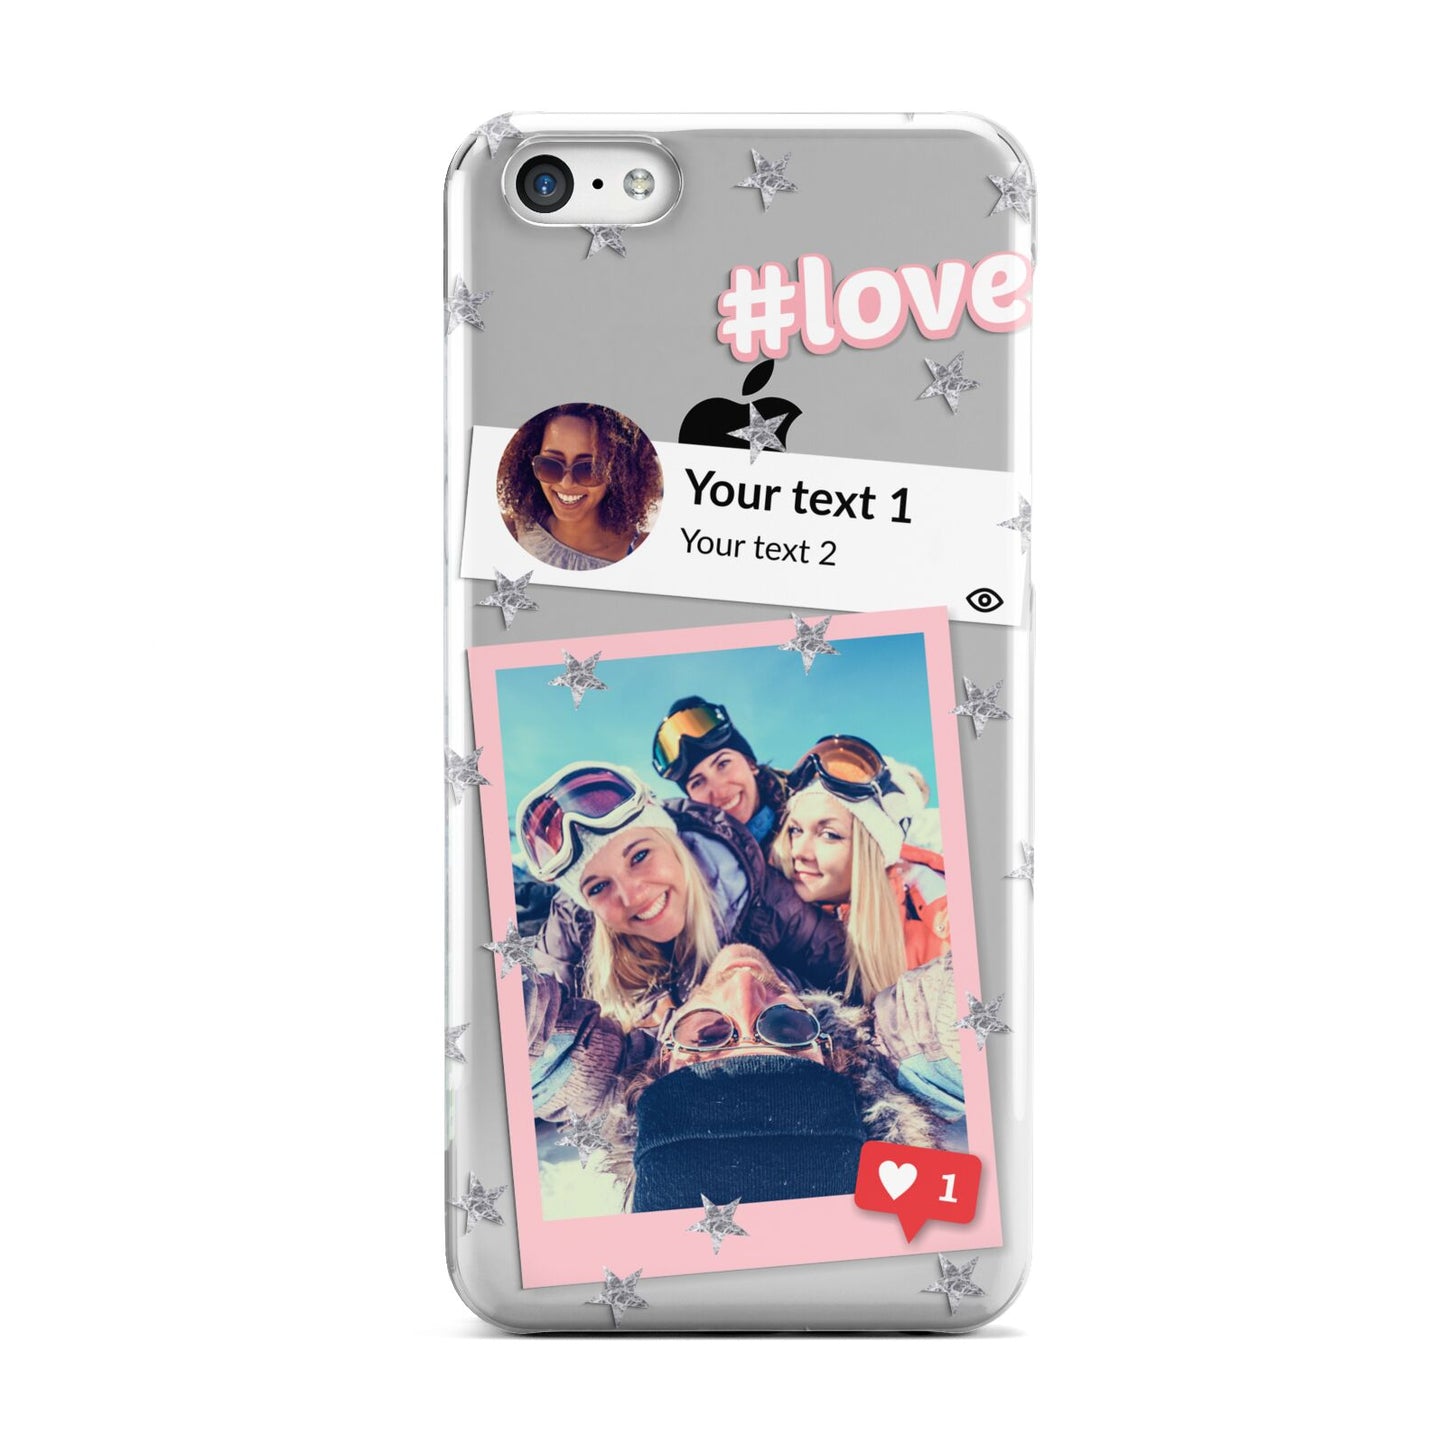 Starry Social Media Photo Montage Upload with Text Apple iPhone 5c Case